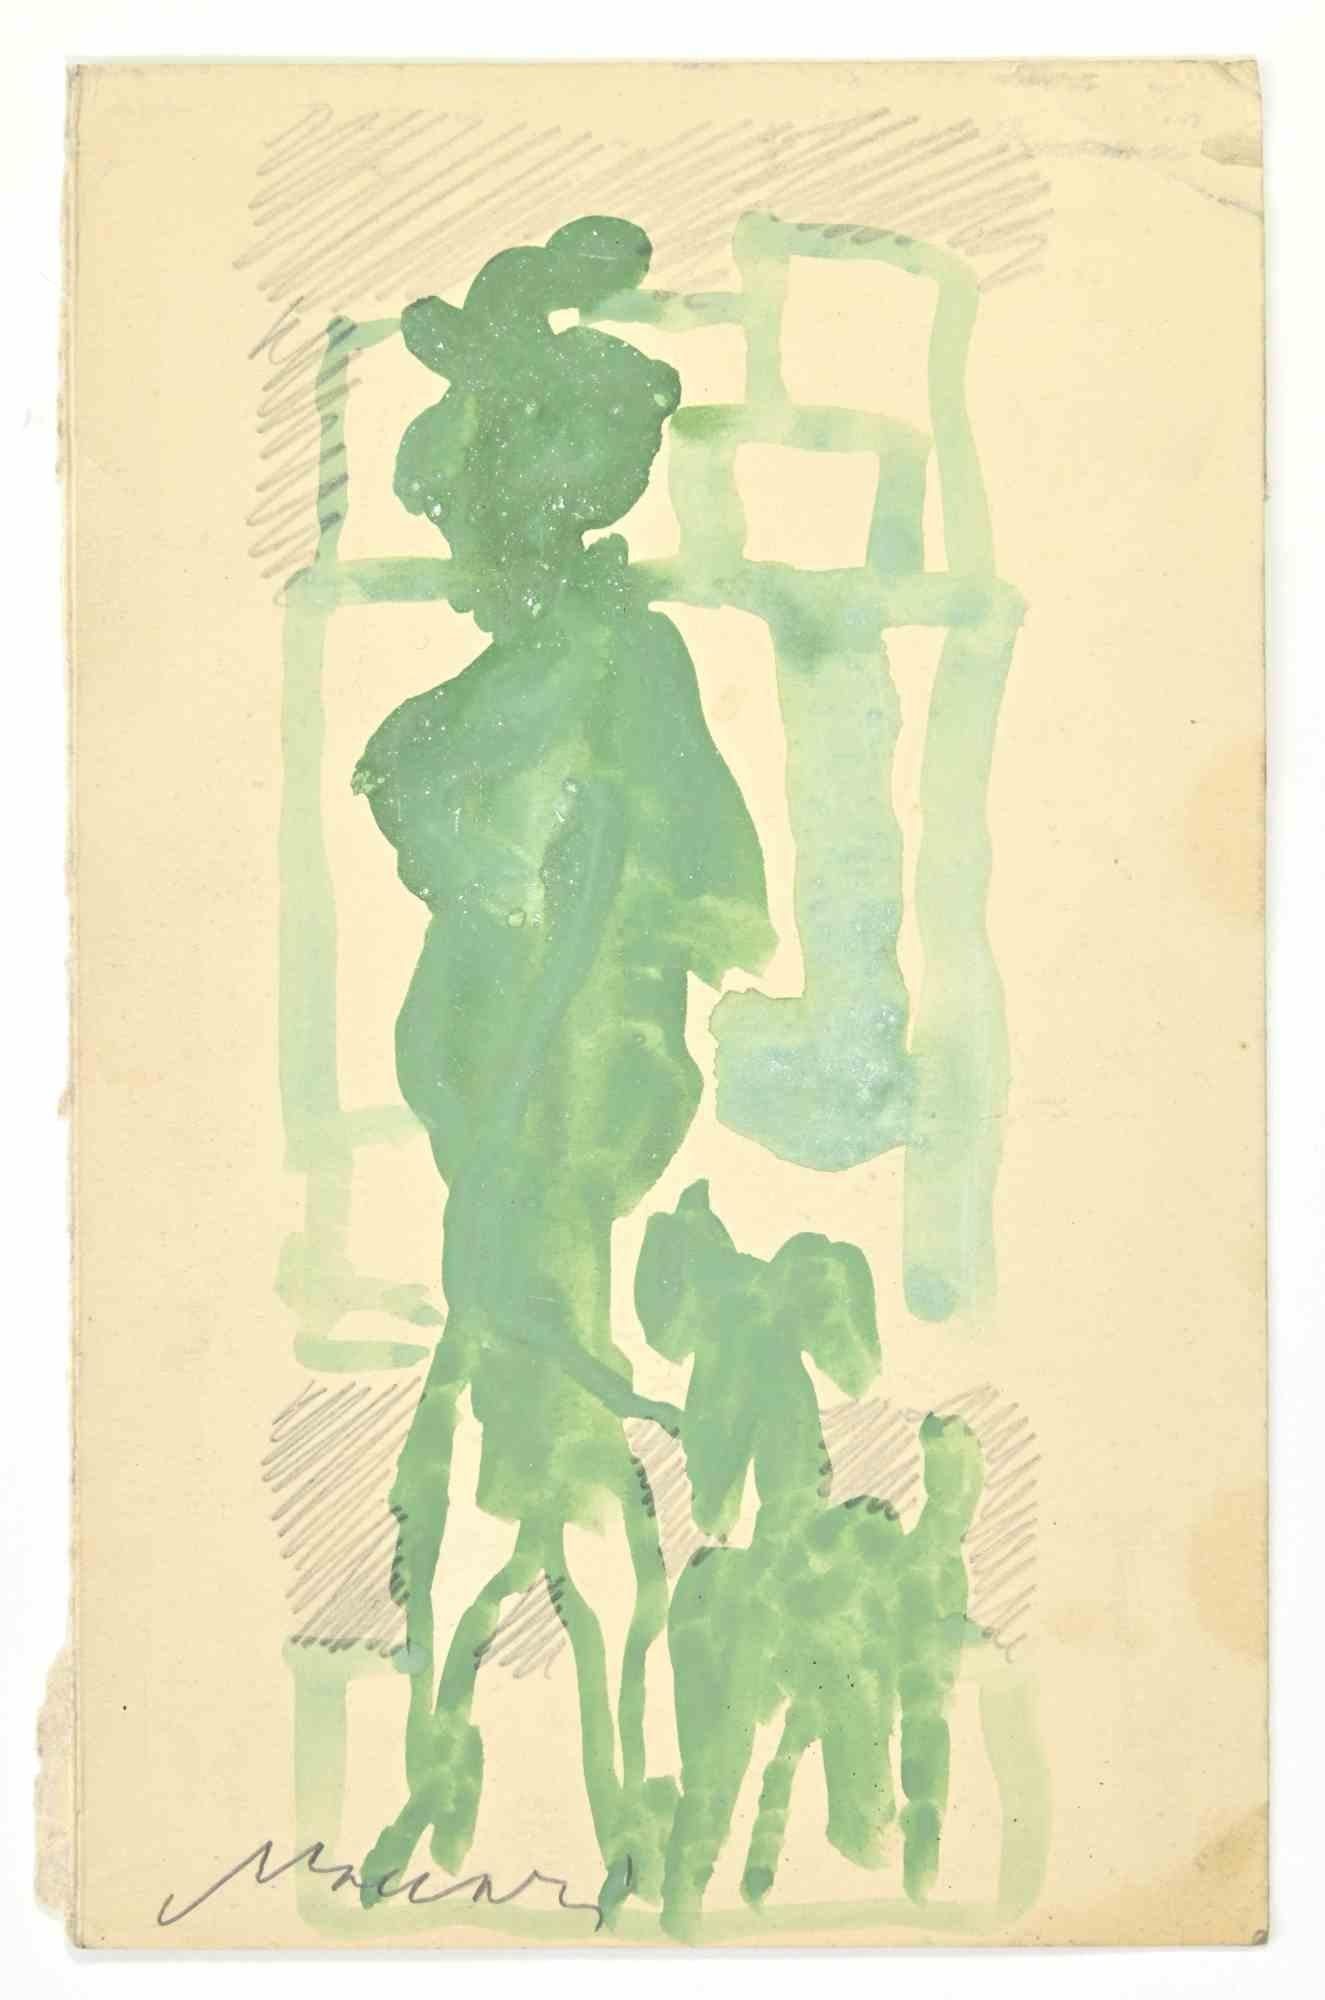 Green Lady is a watercolor Drawing realized by Mino Maccari  (1924-1989) in the 1960s.

Hand-signed on the lower.

Good condition.

Mino Maccari (Siena, 1924-Rome, June 16, 1989) was an Italian writer, painter, engraver and journalist, winner of the